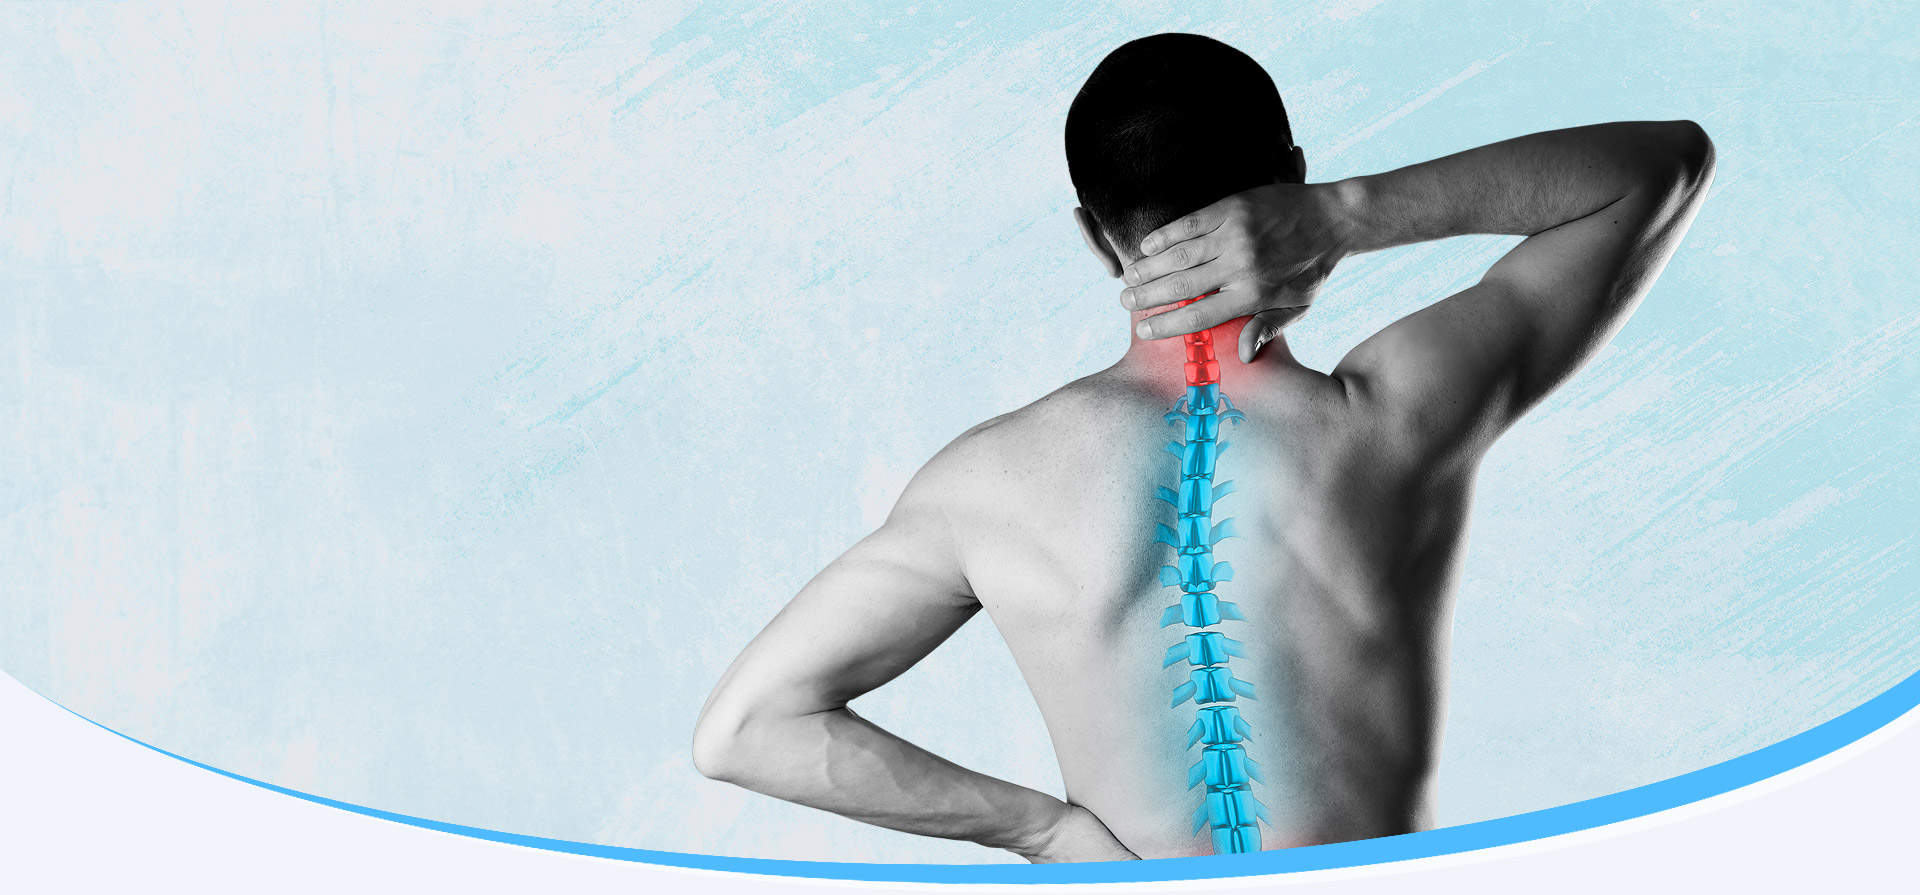 We offer highly specialized 
Musculoskeletal Treatments